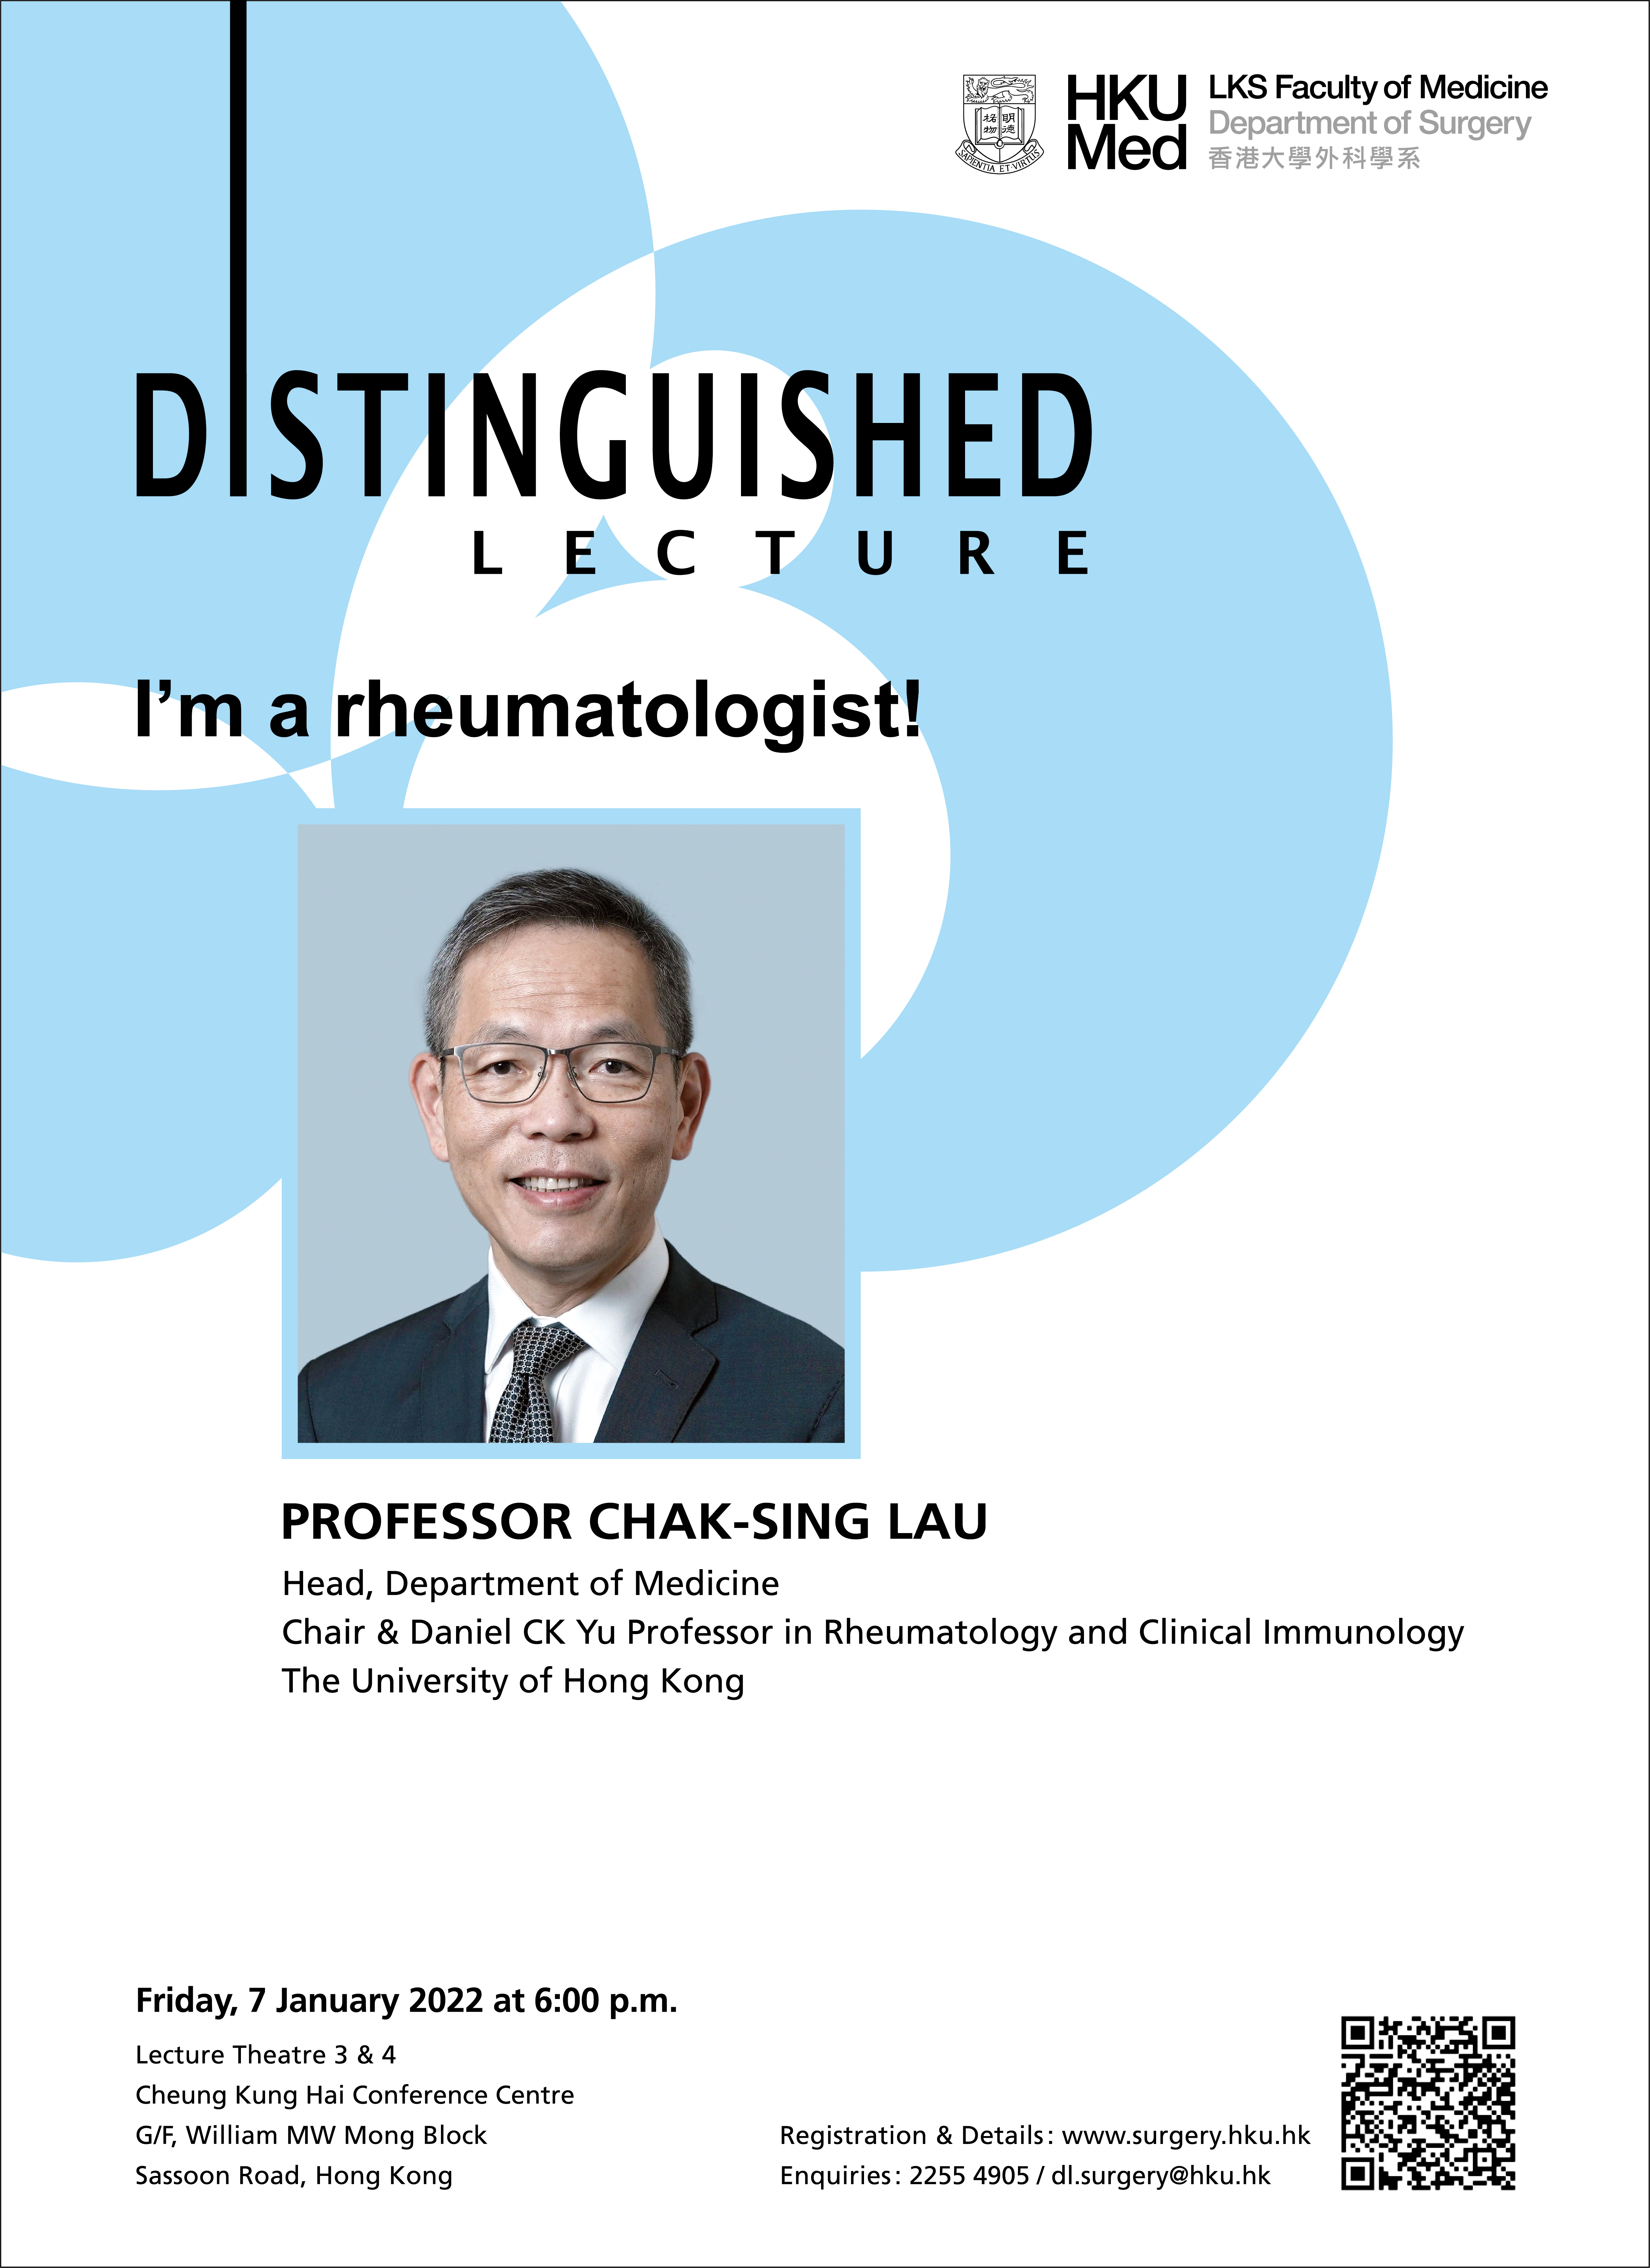 Distinguished Lecture Poster